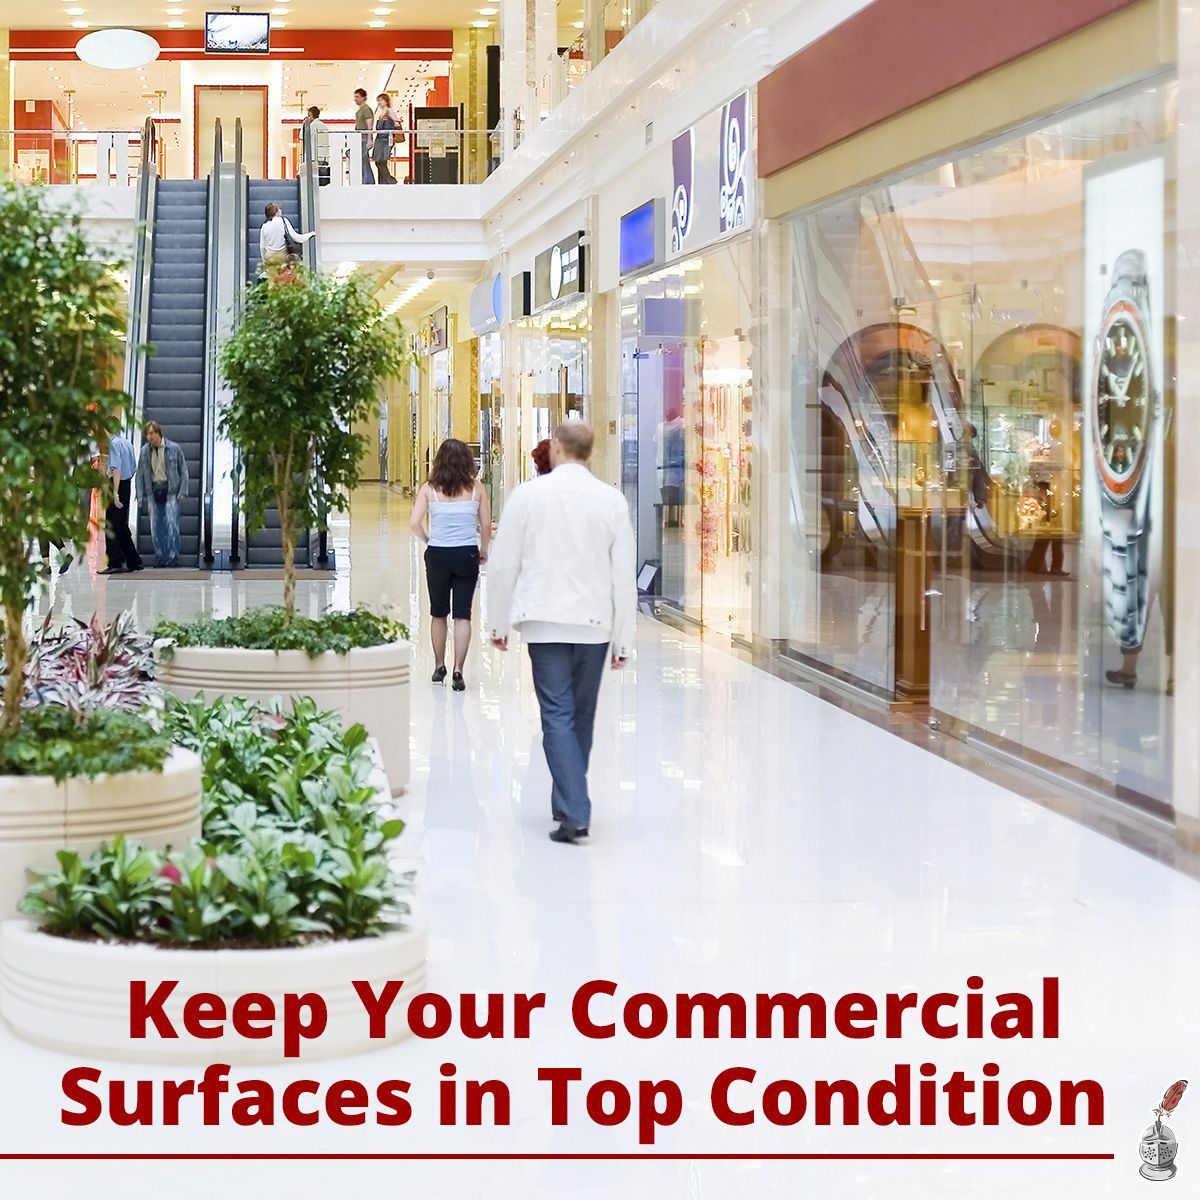 Keep Your Commercial Surfaces in Top Condition